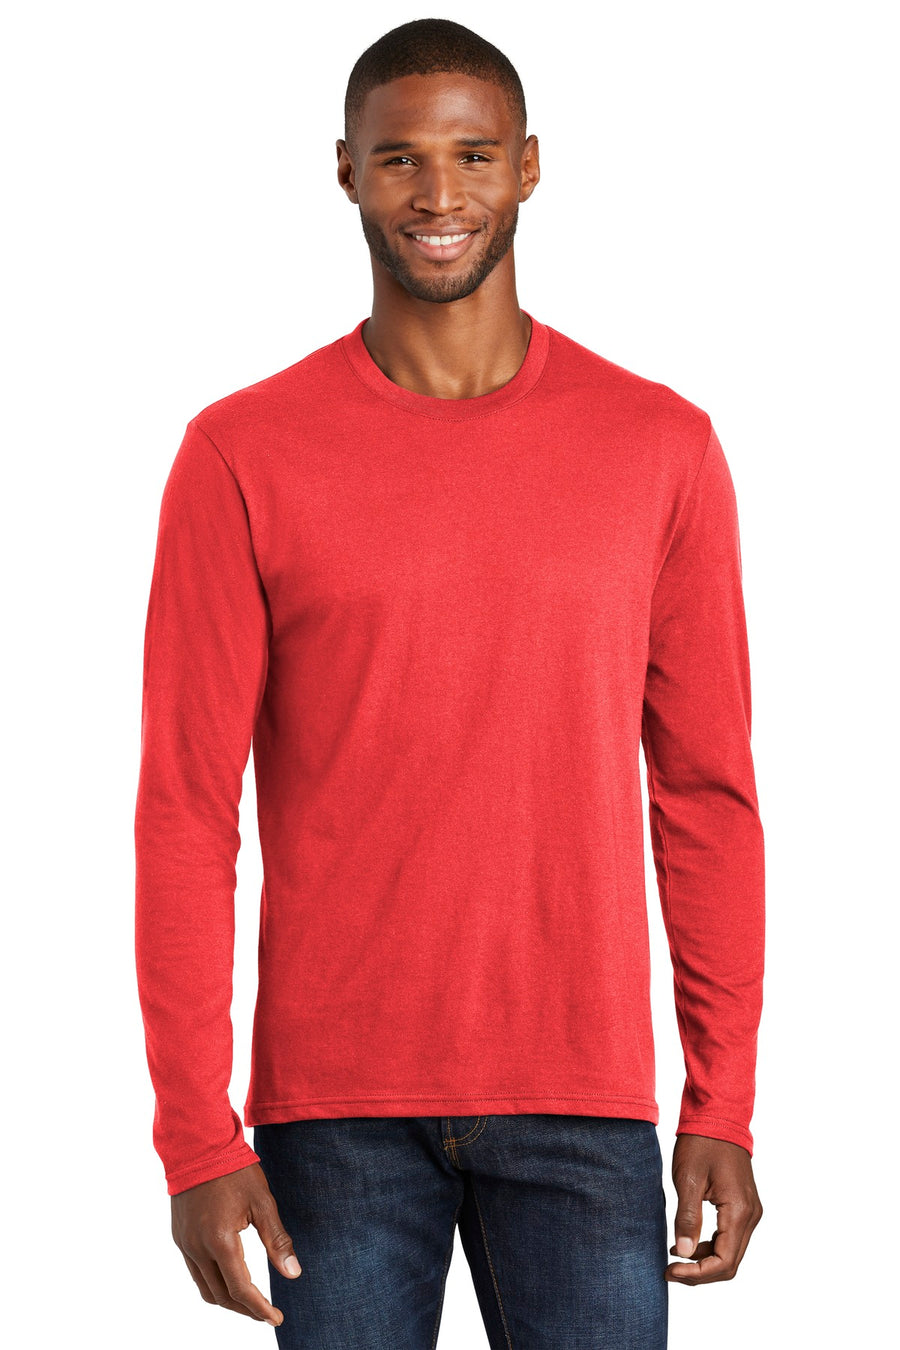 PC455LS-Bright Red Heather-front_model